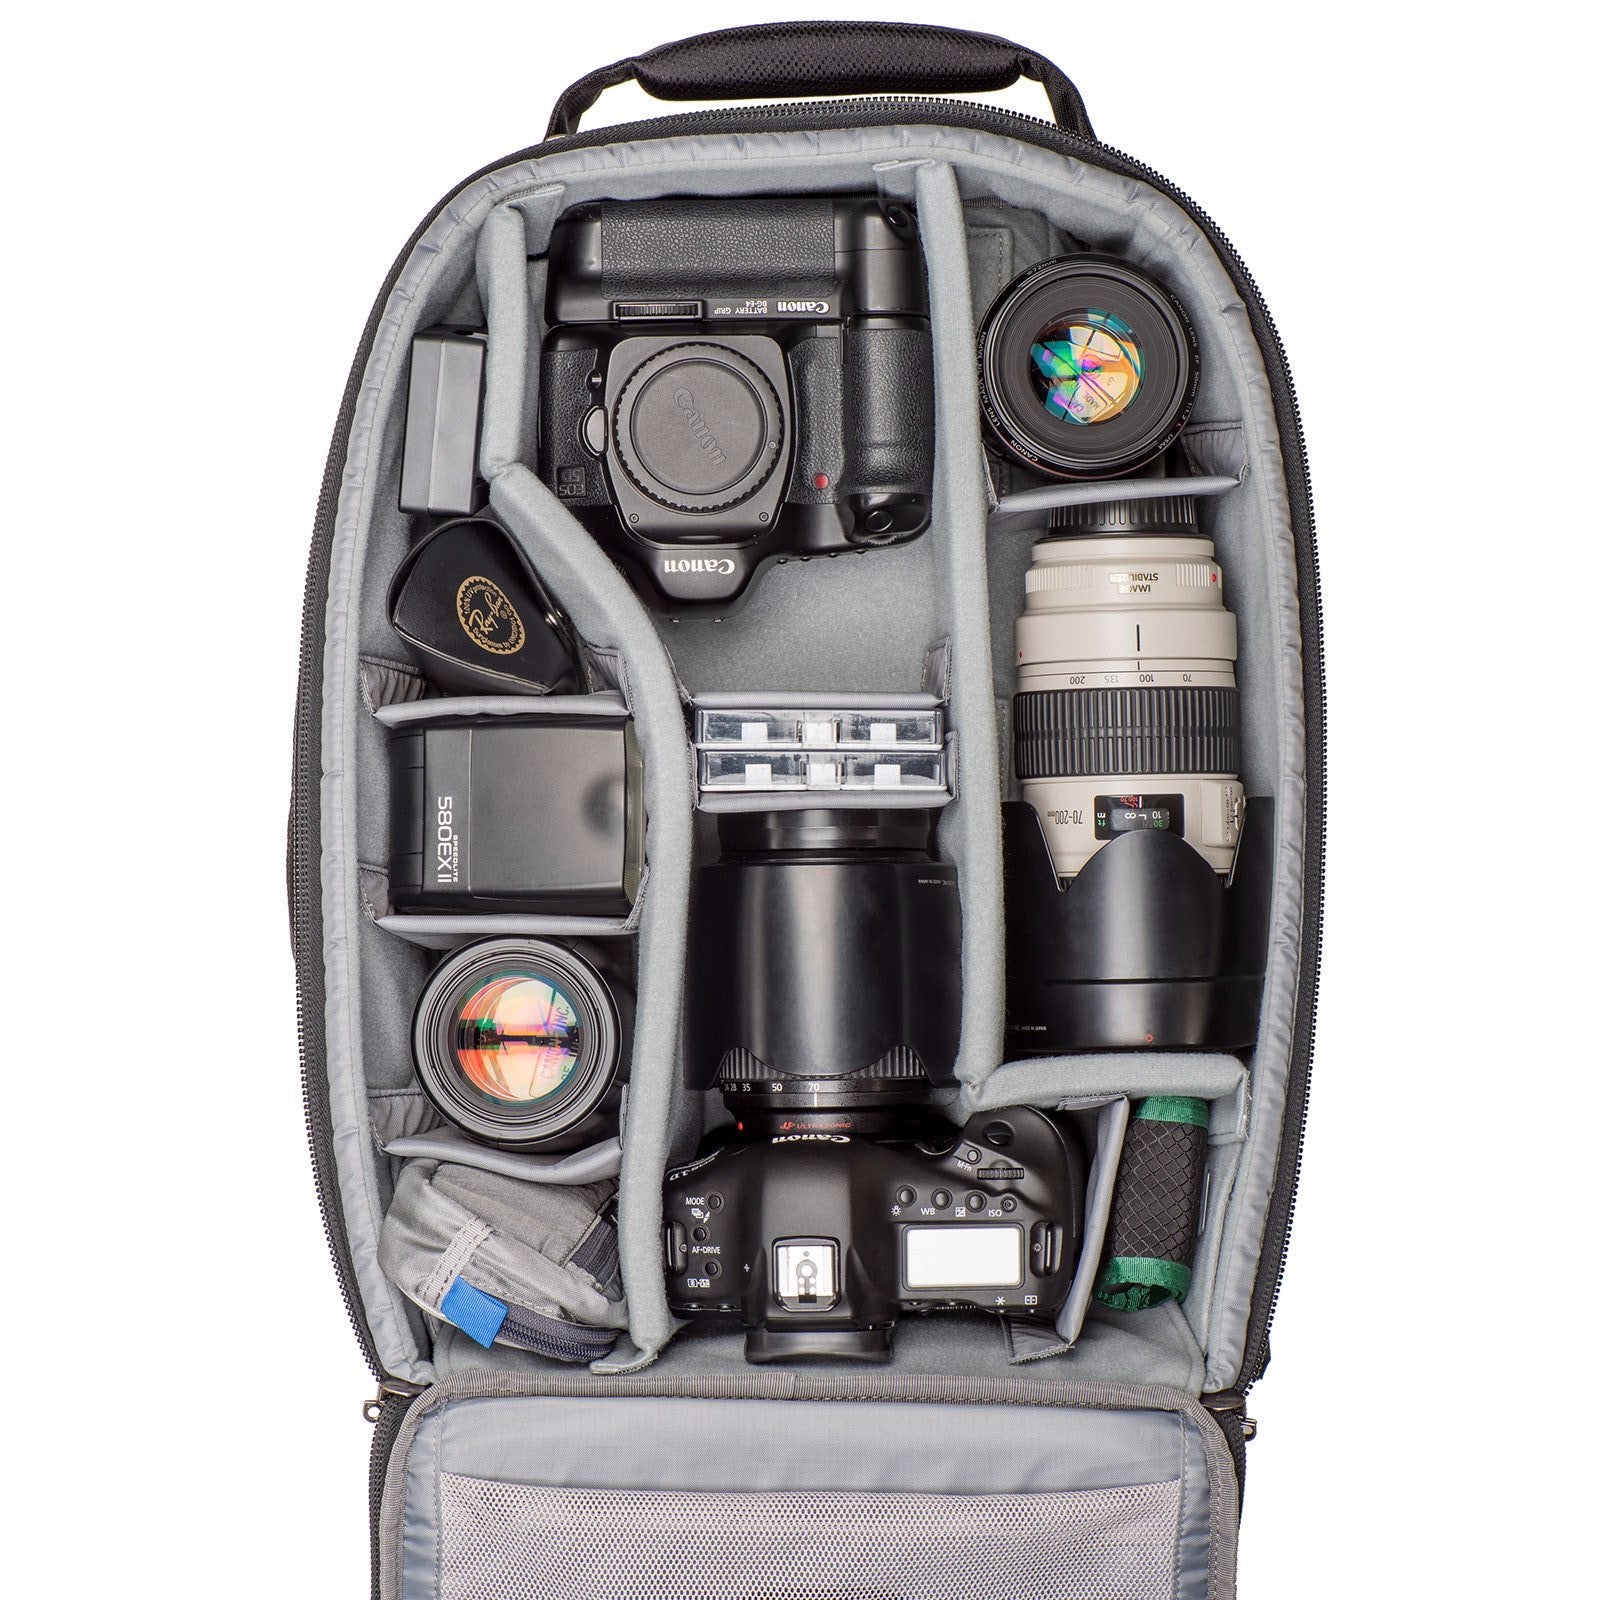 Gripped Canon body, standard body with lens attached, three additional lenses, flash